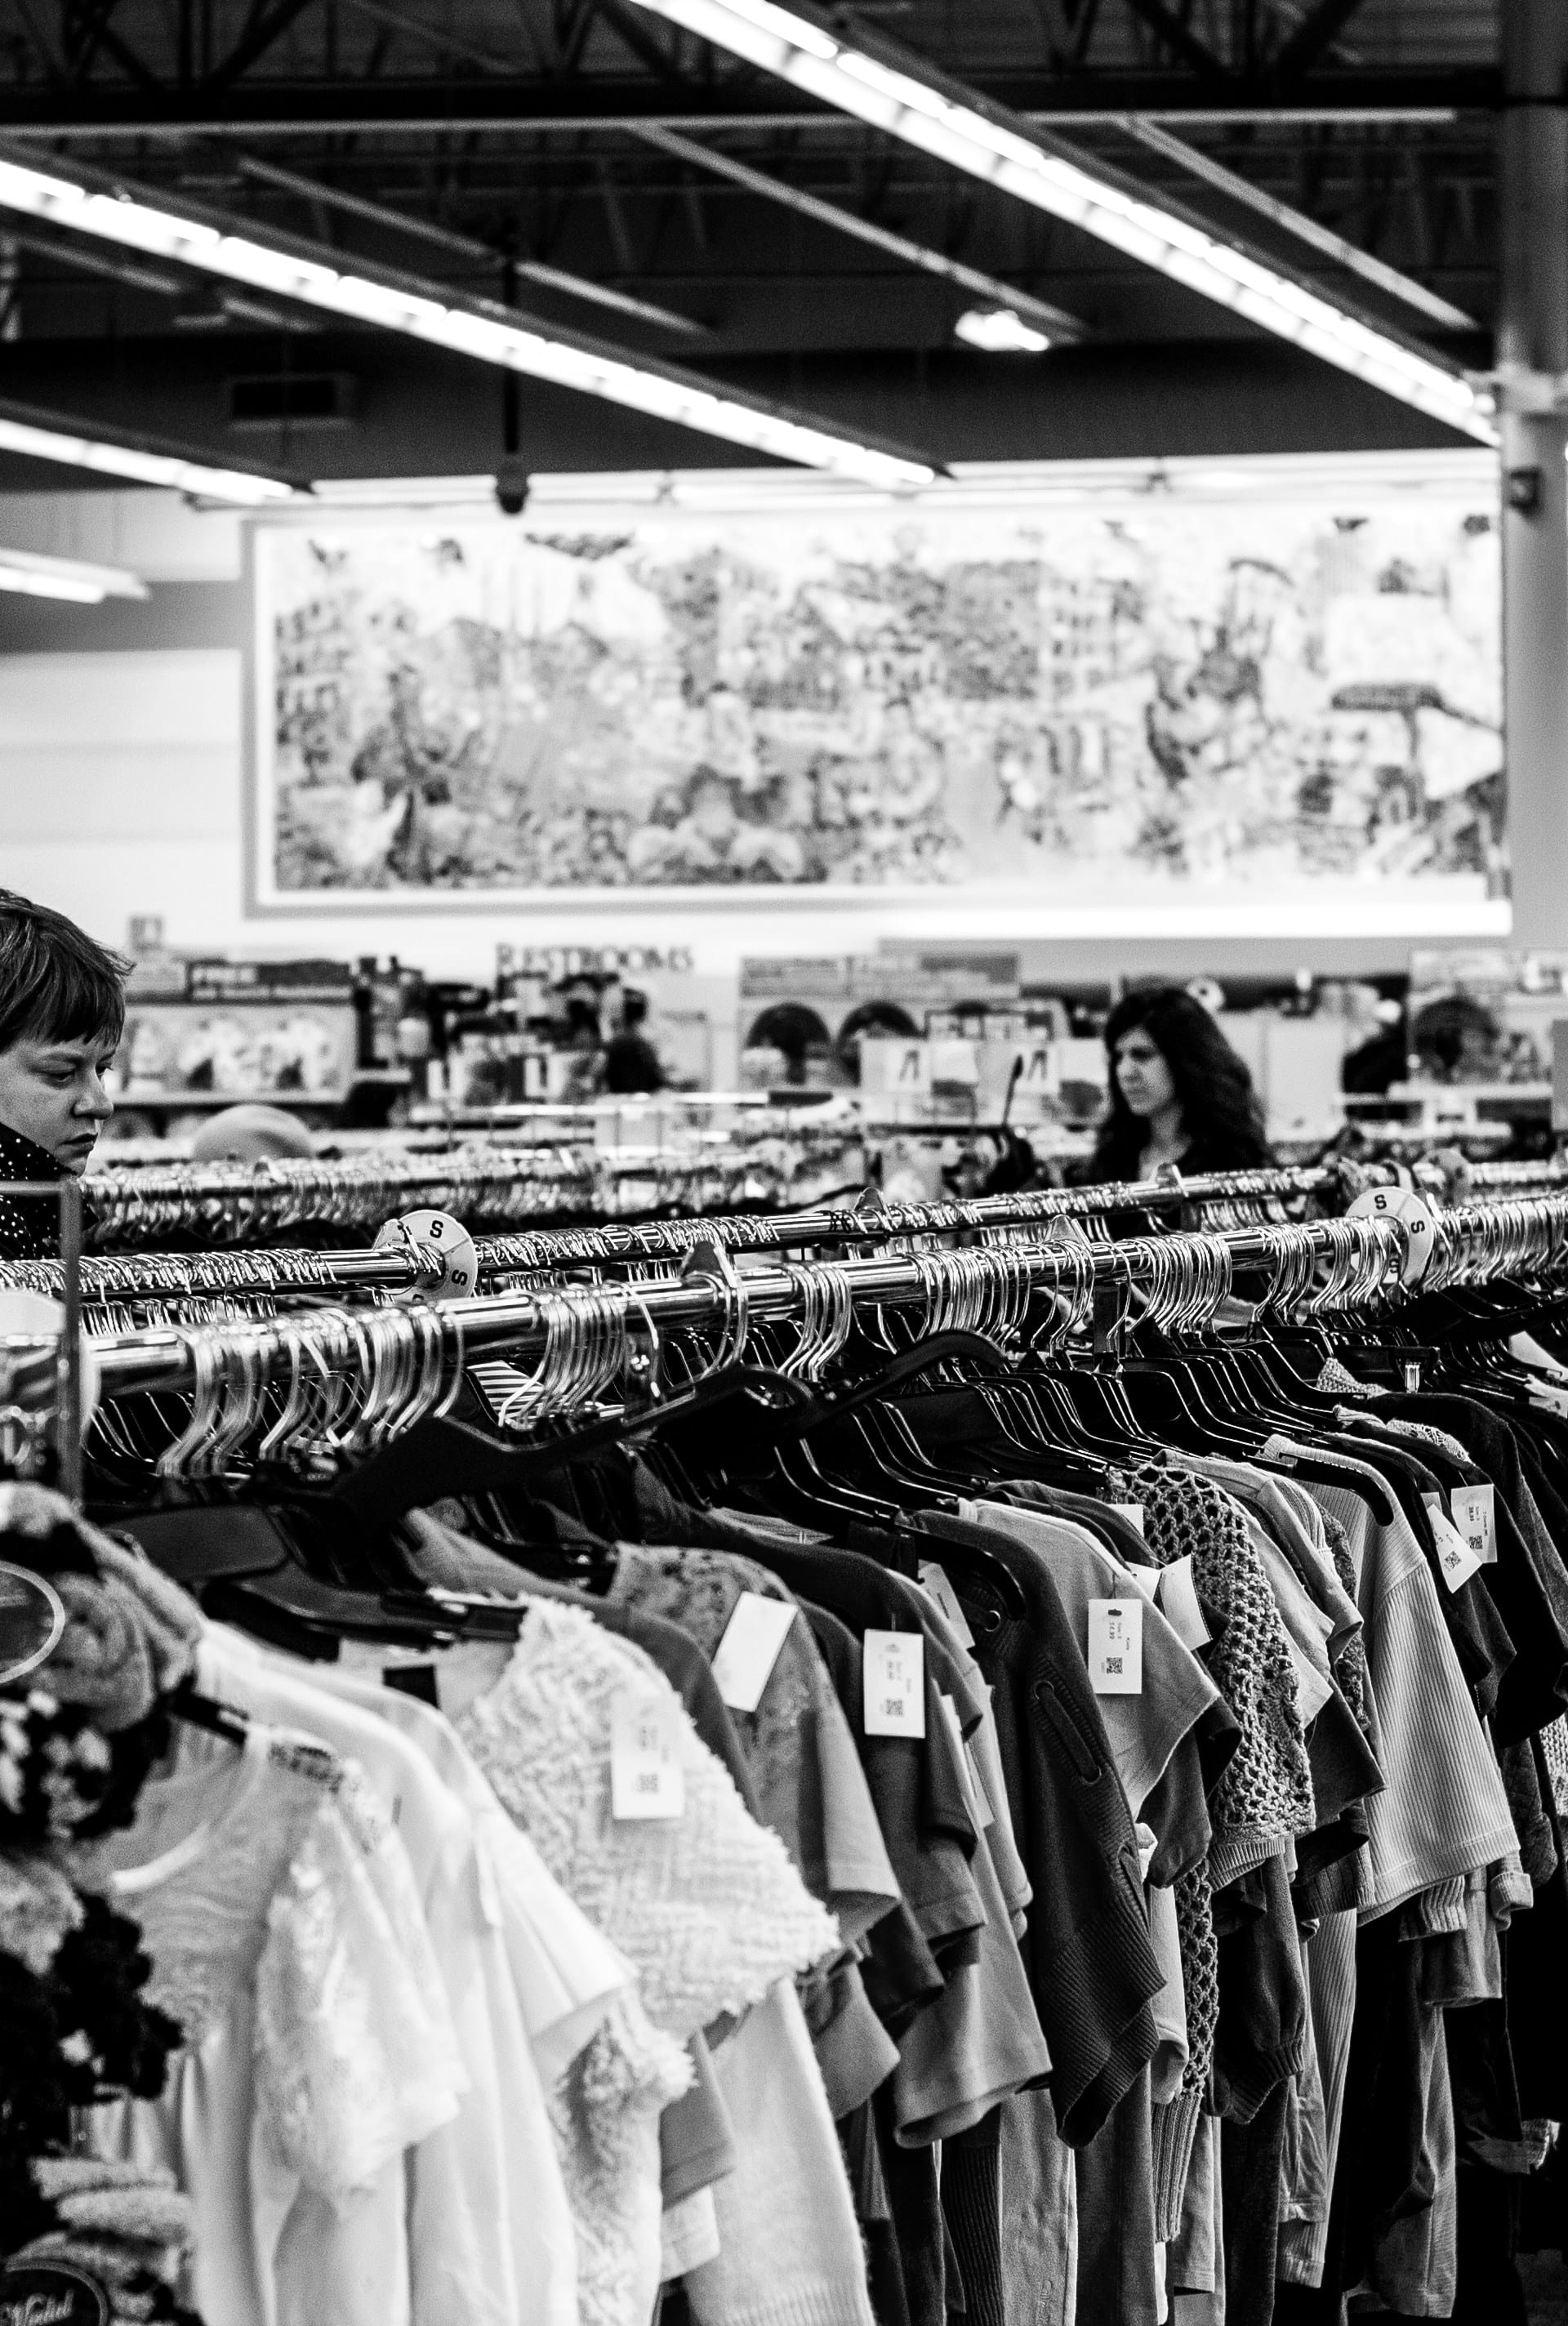 Hygiene Concerns with Second-Hand Clothing? How to Clean